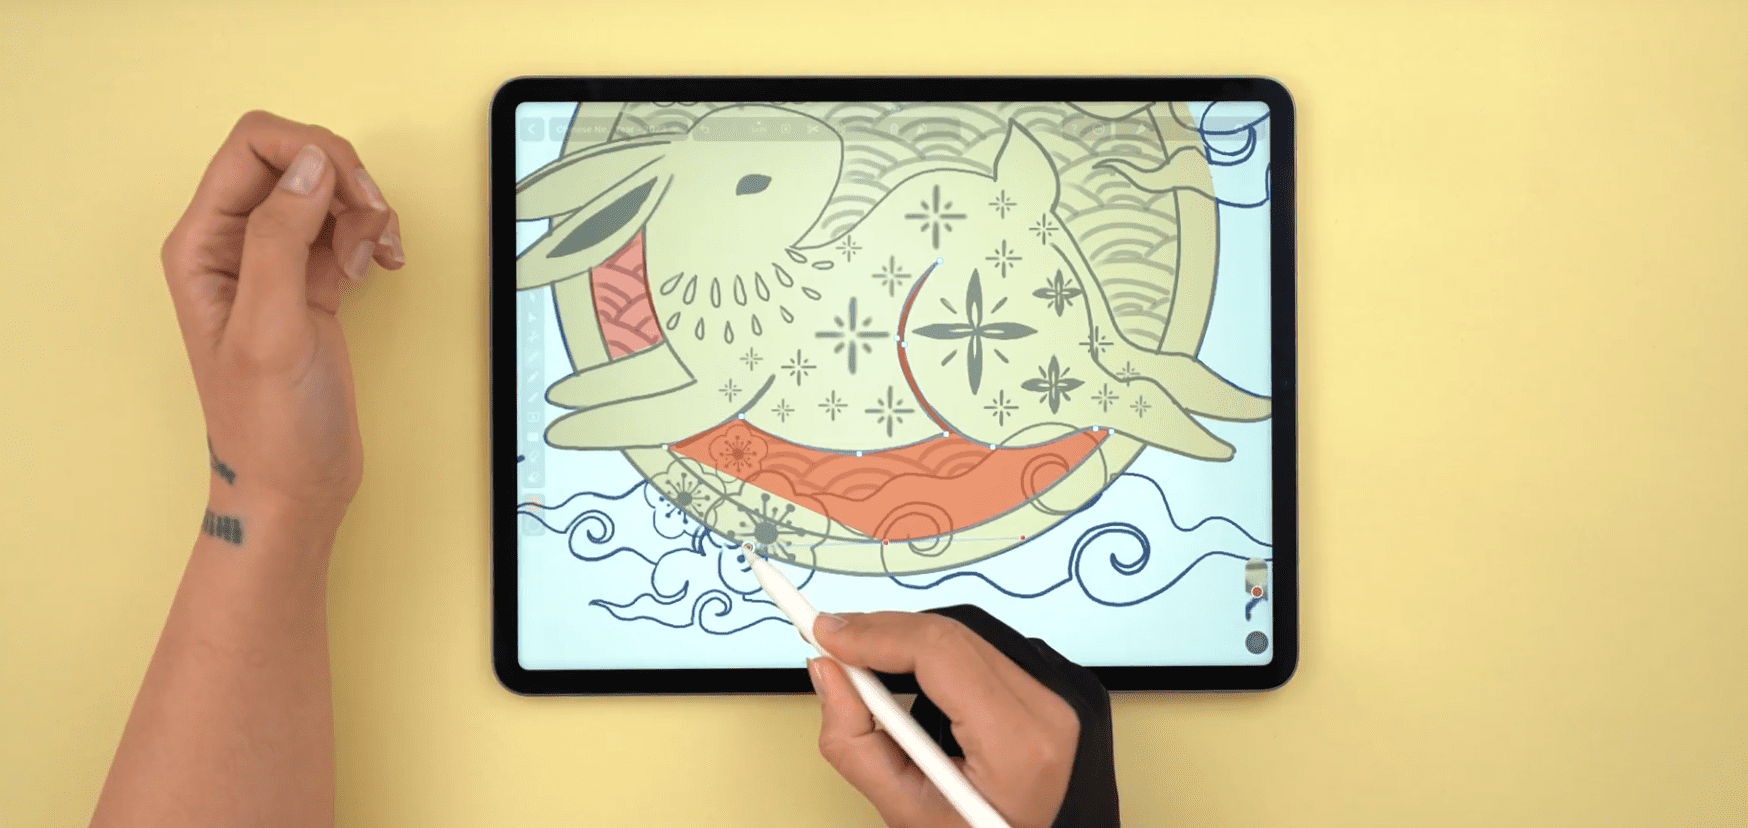 Hand sketching a rabbit on a large tablet screen